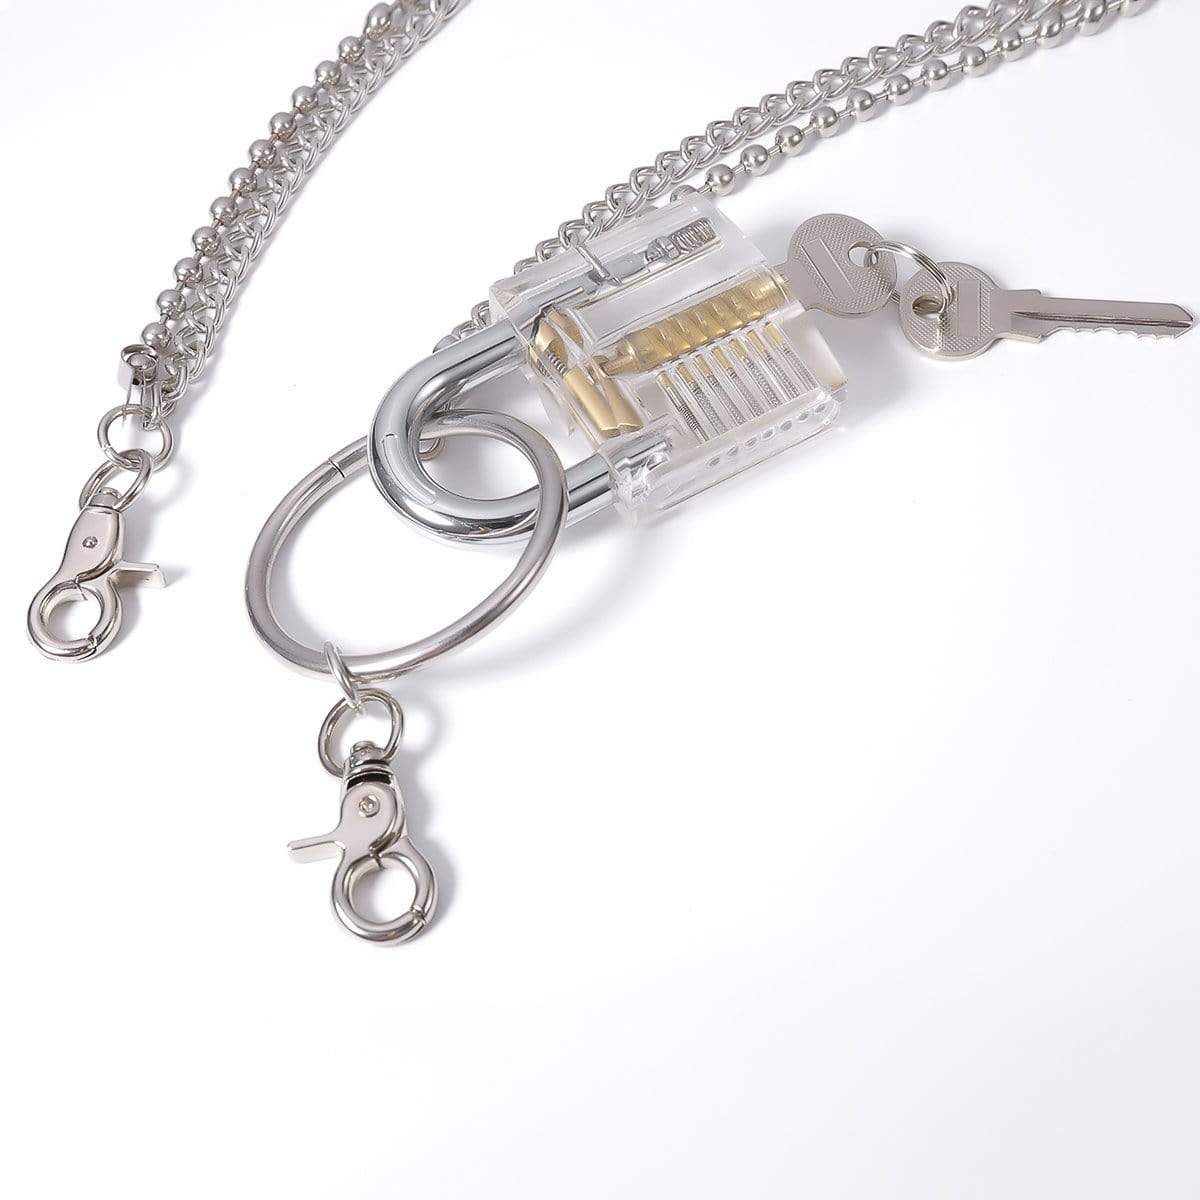 1pc Silver Tri-layer Metal Chain Key & Lock Pendant For Suit Pants &  Trousers